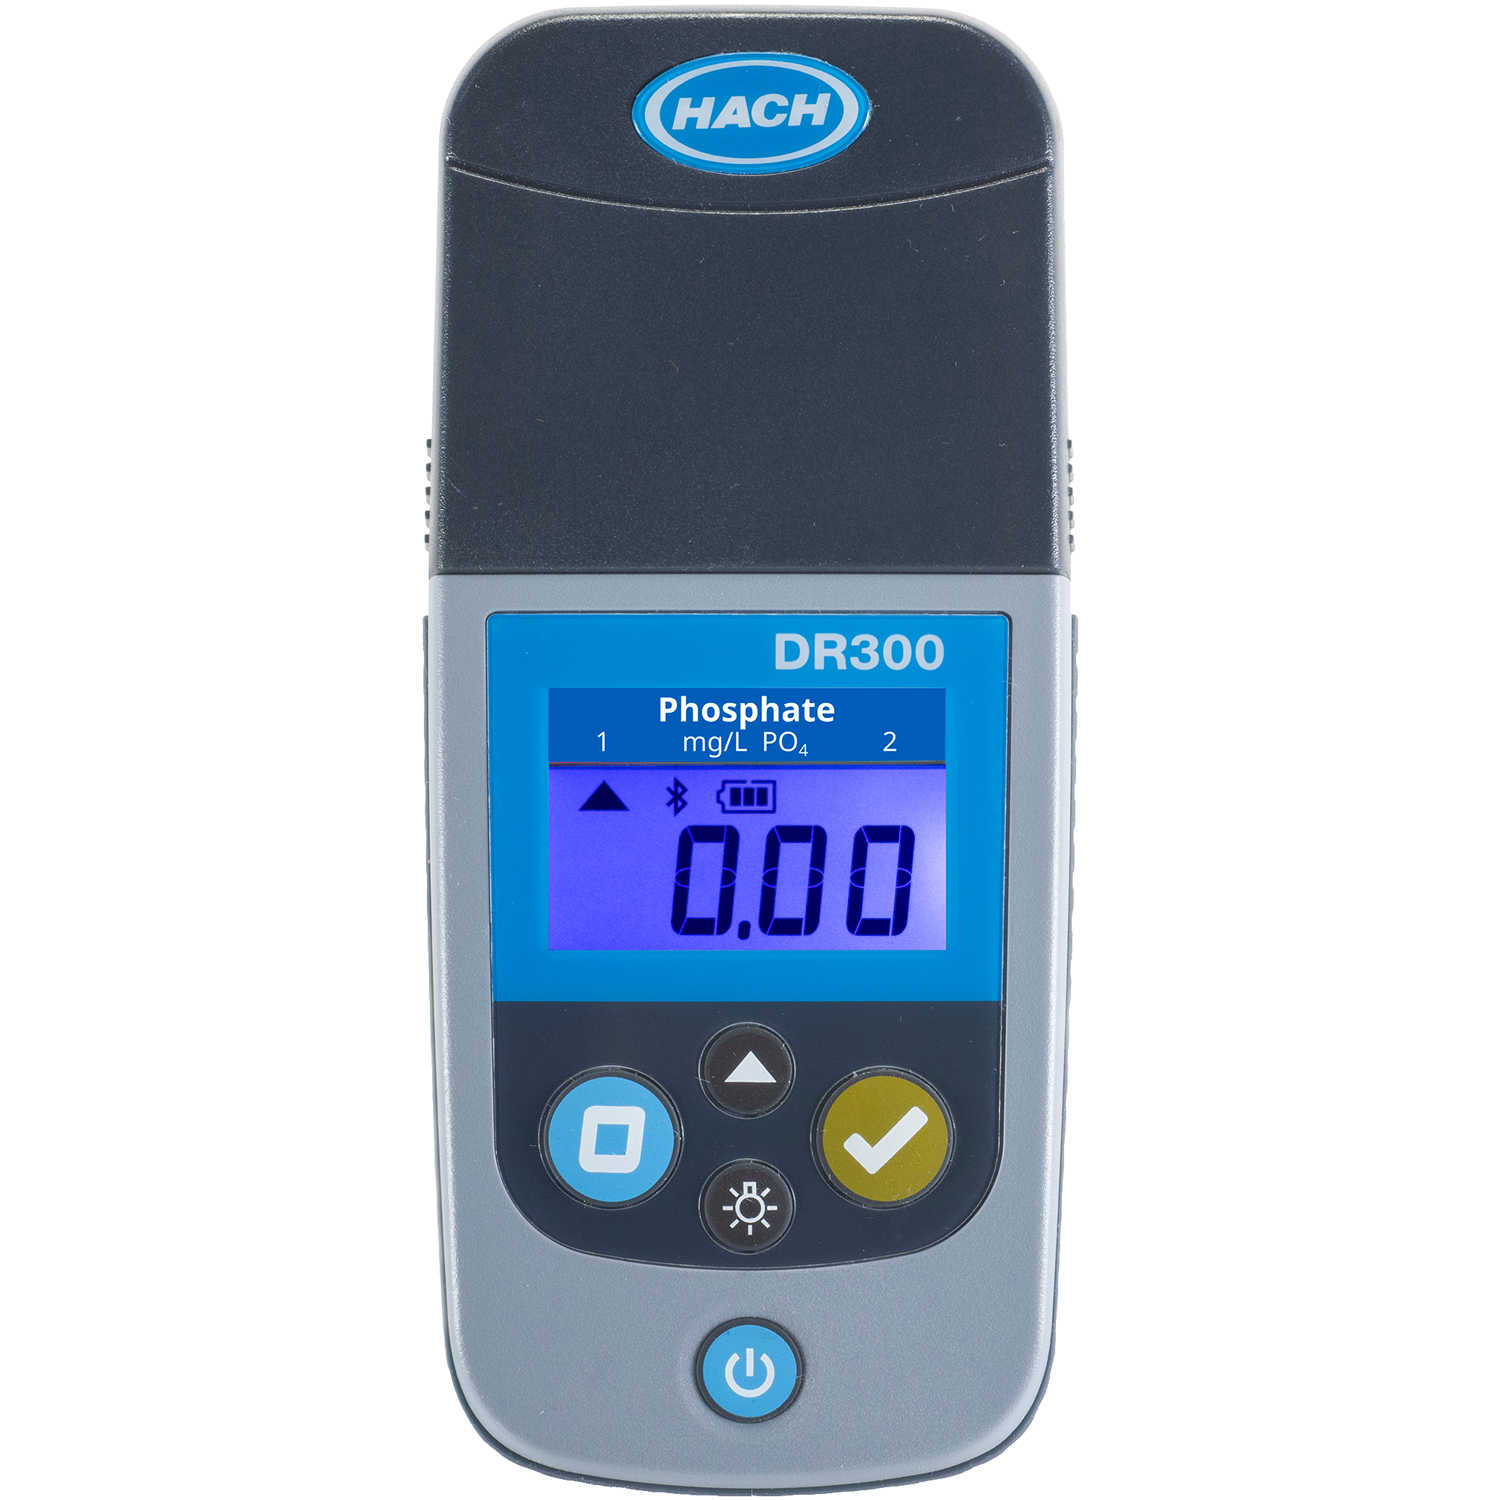 Hach DR 300 Pocket Colorimeter Phosphate | Forestry Suppliers, Inc.